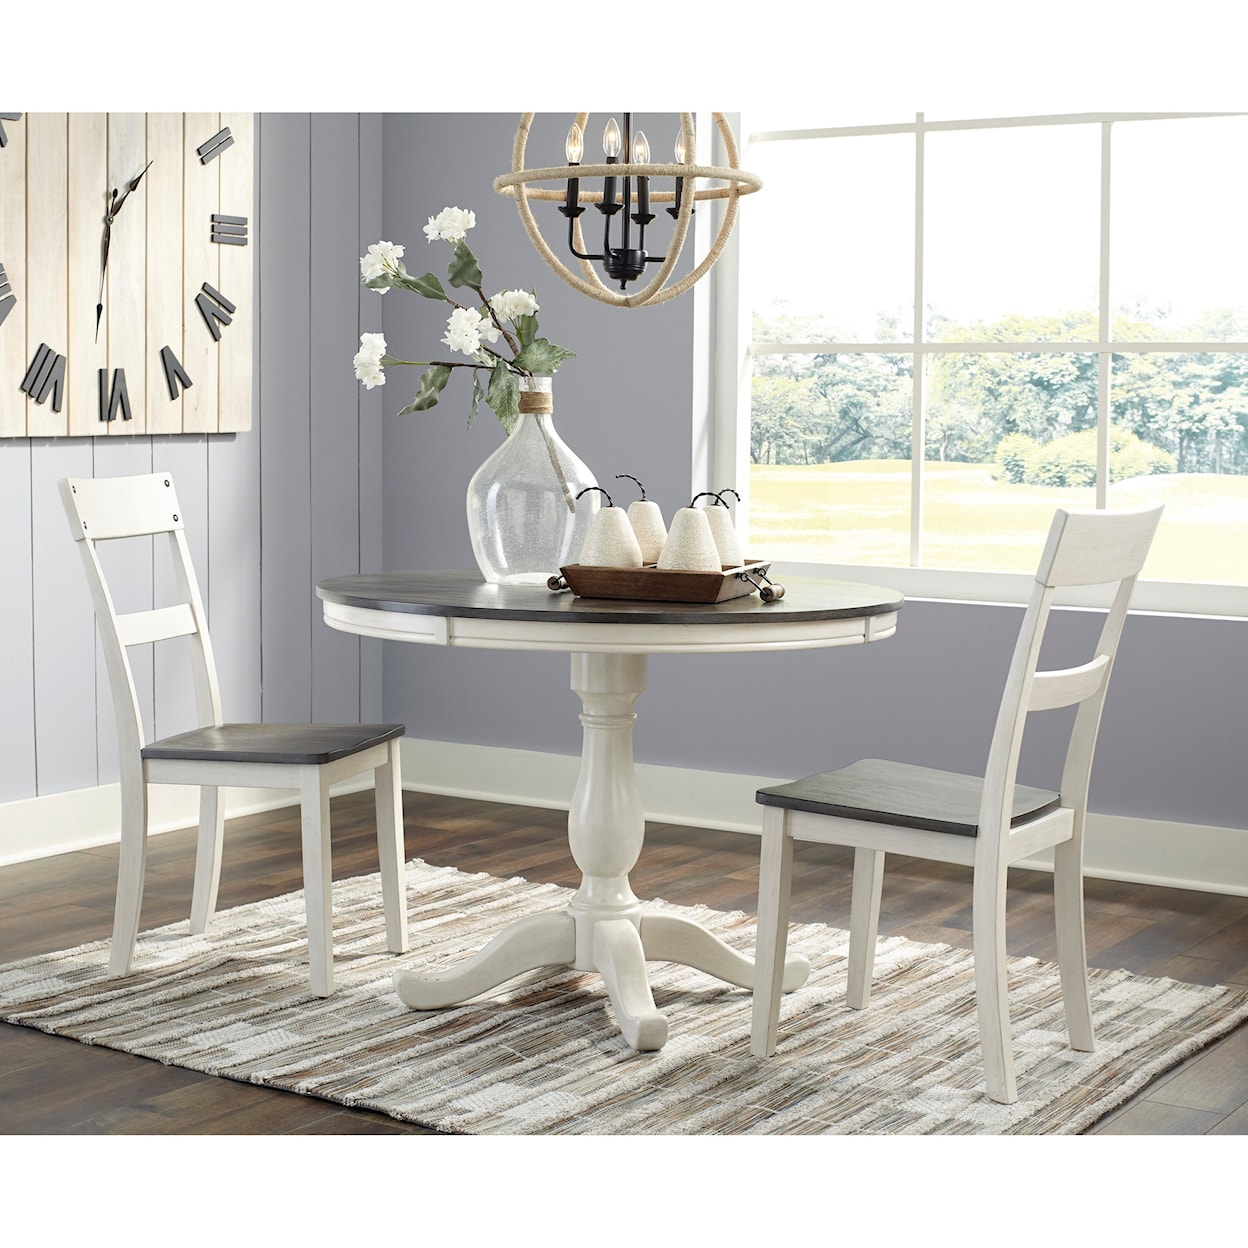 Signature Design by Ashley Nelling 3pc Dining Room Group